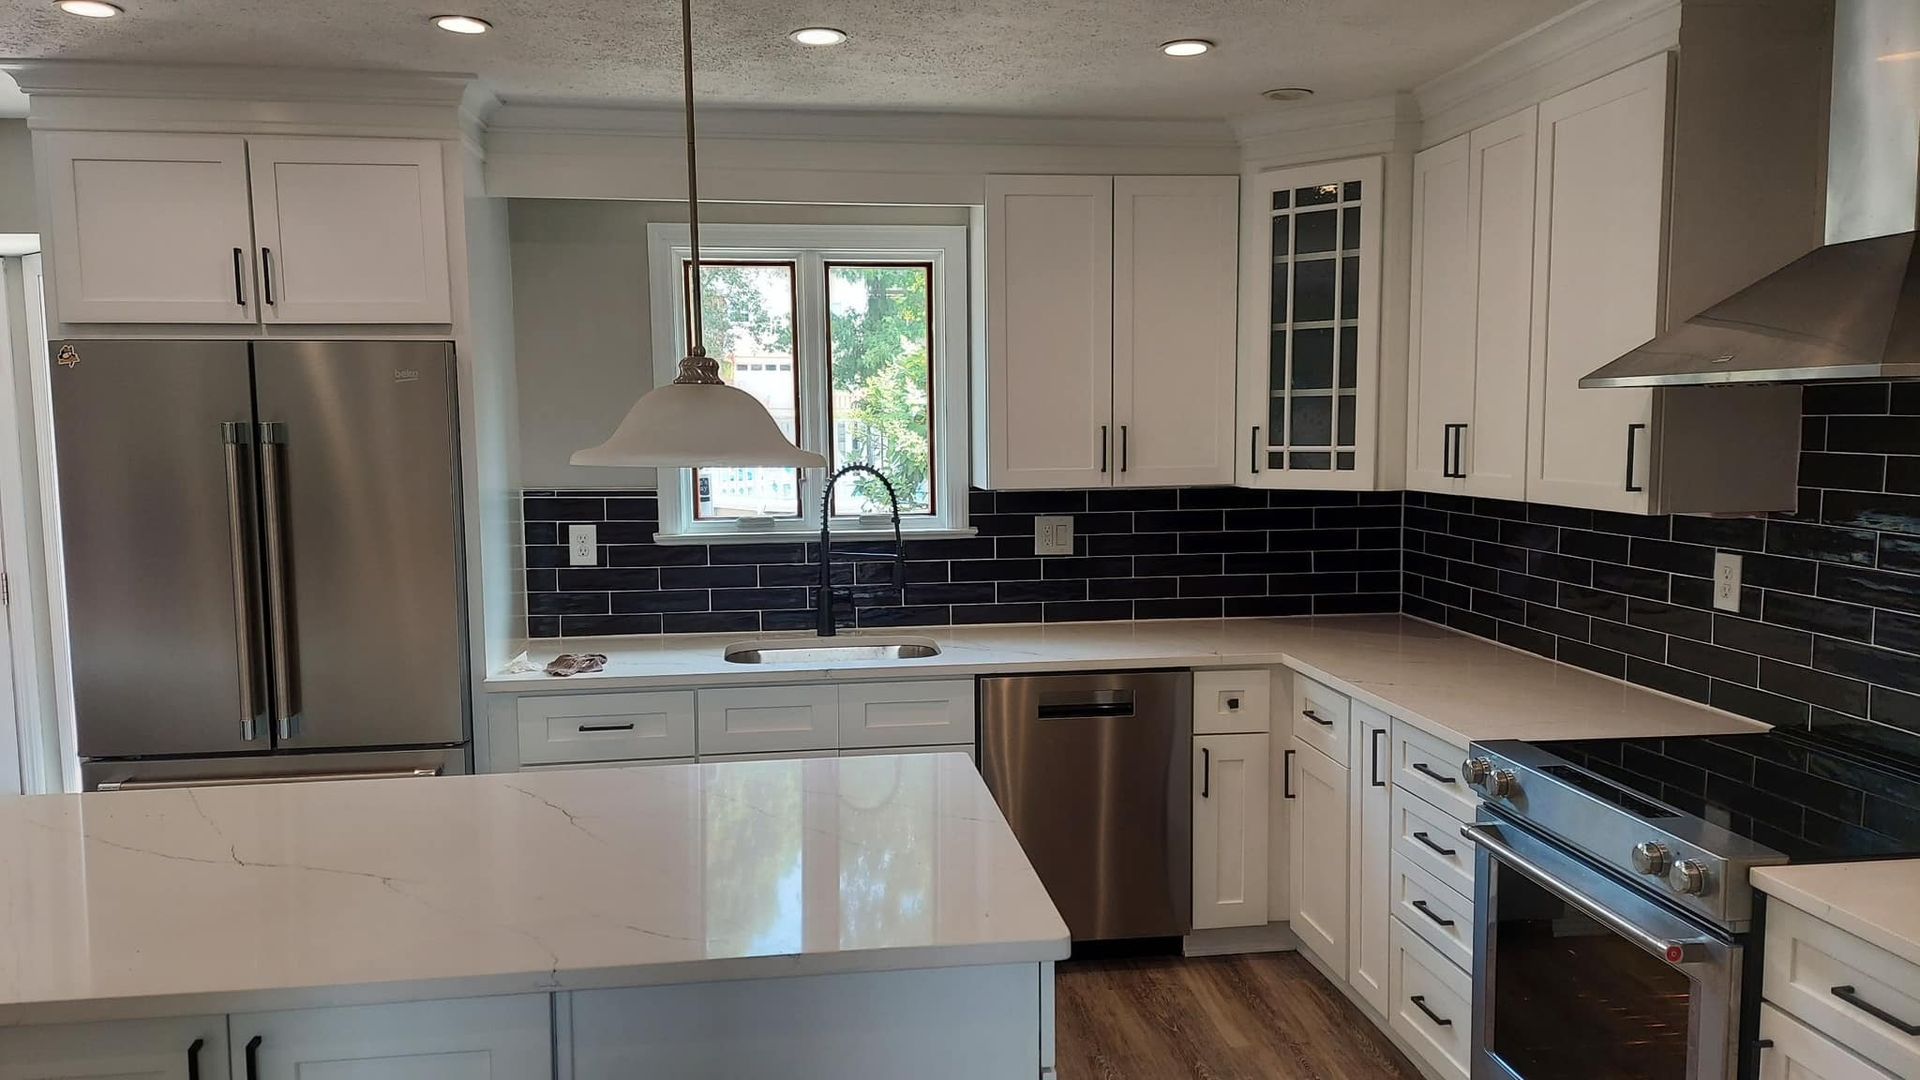 kitchen remodeling project by obringers with white shaker style cabinety and white granite countertops framed by a dark tile backsplash